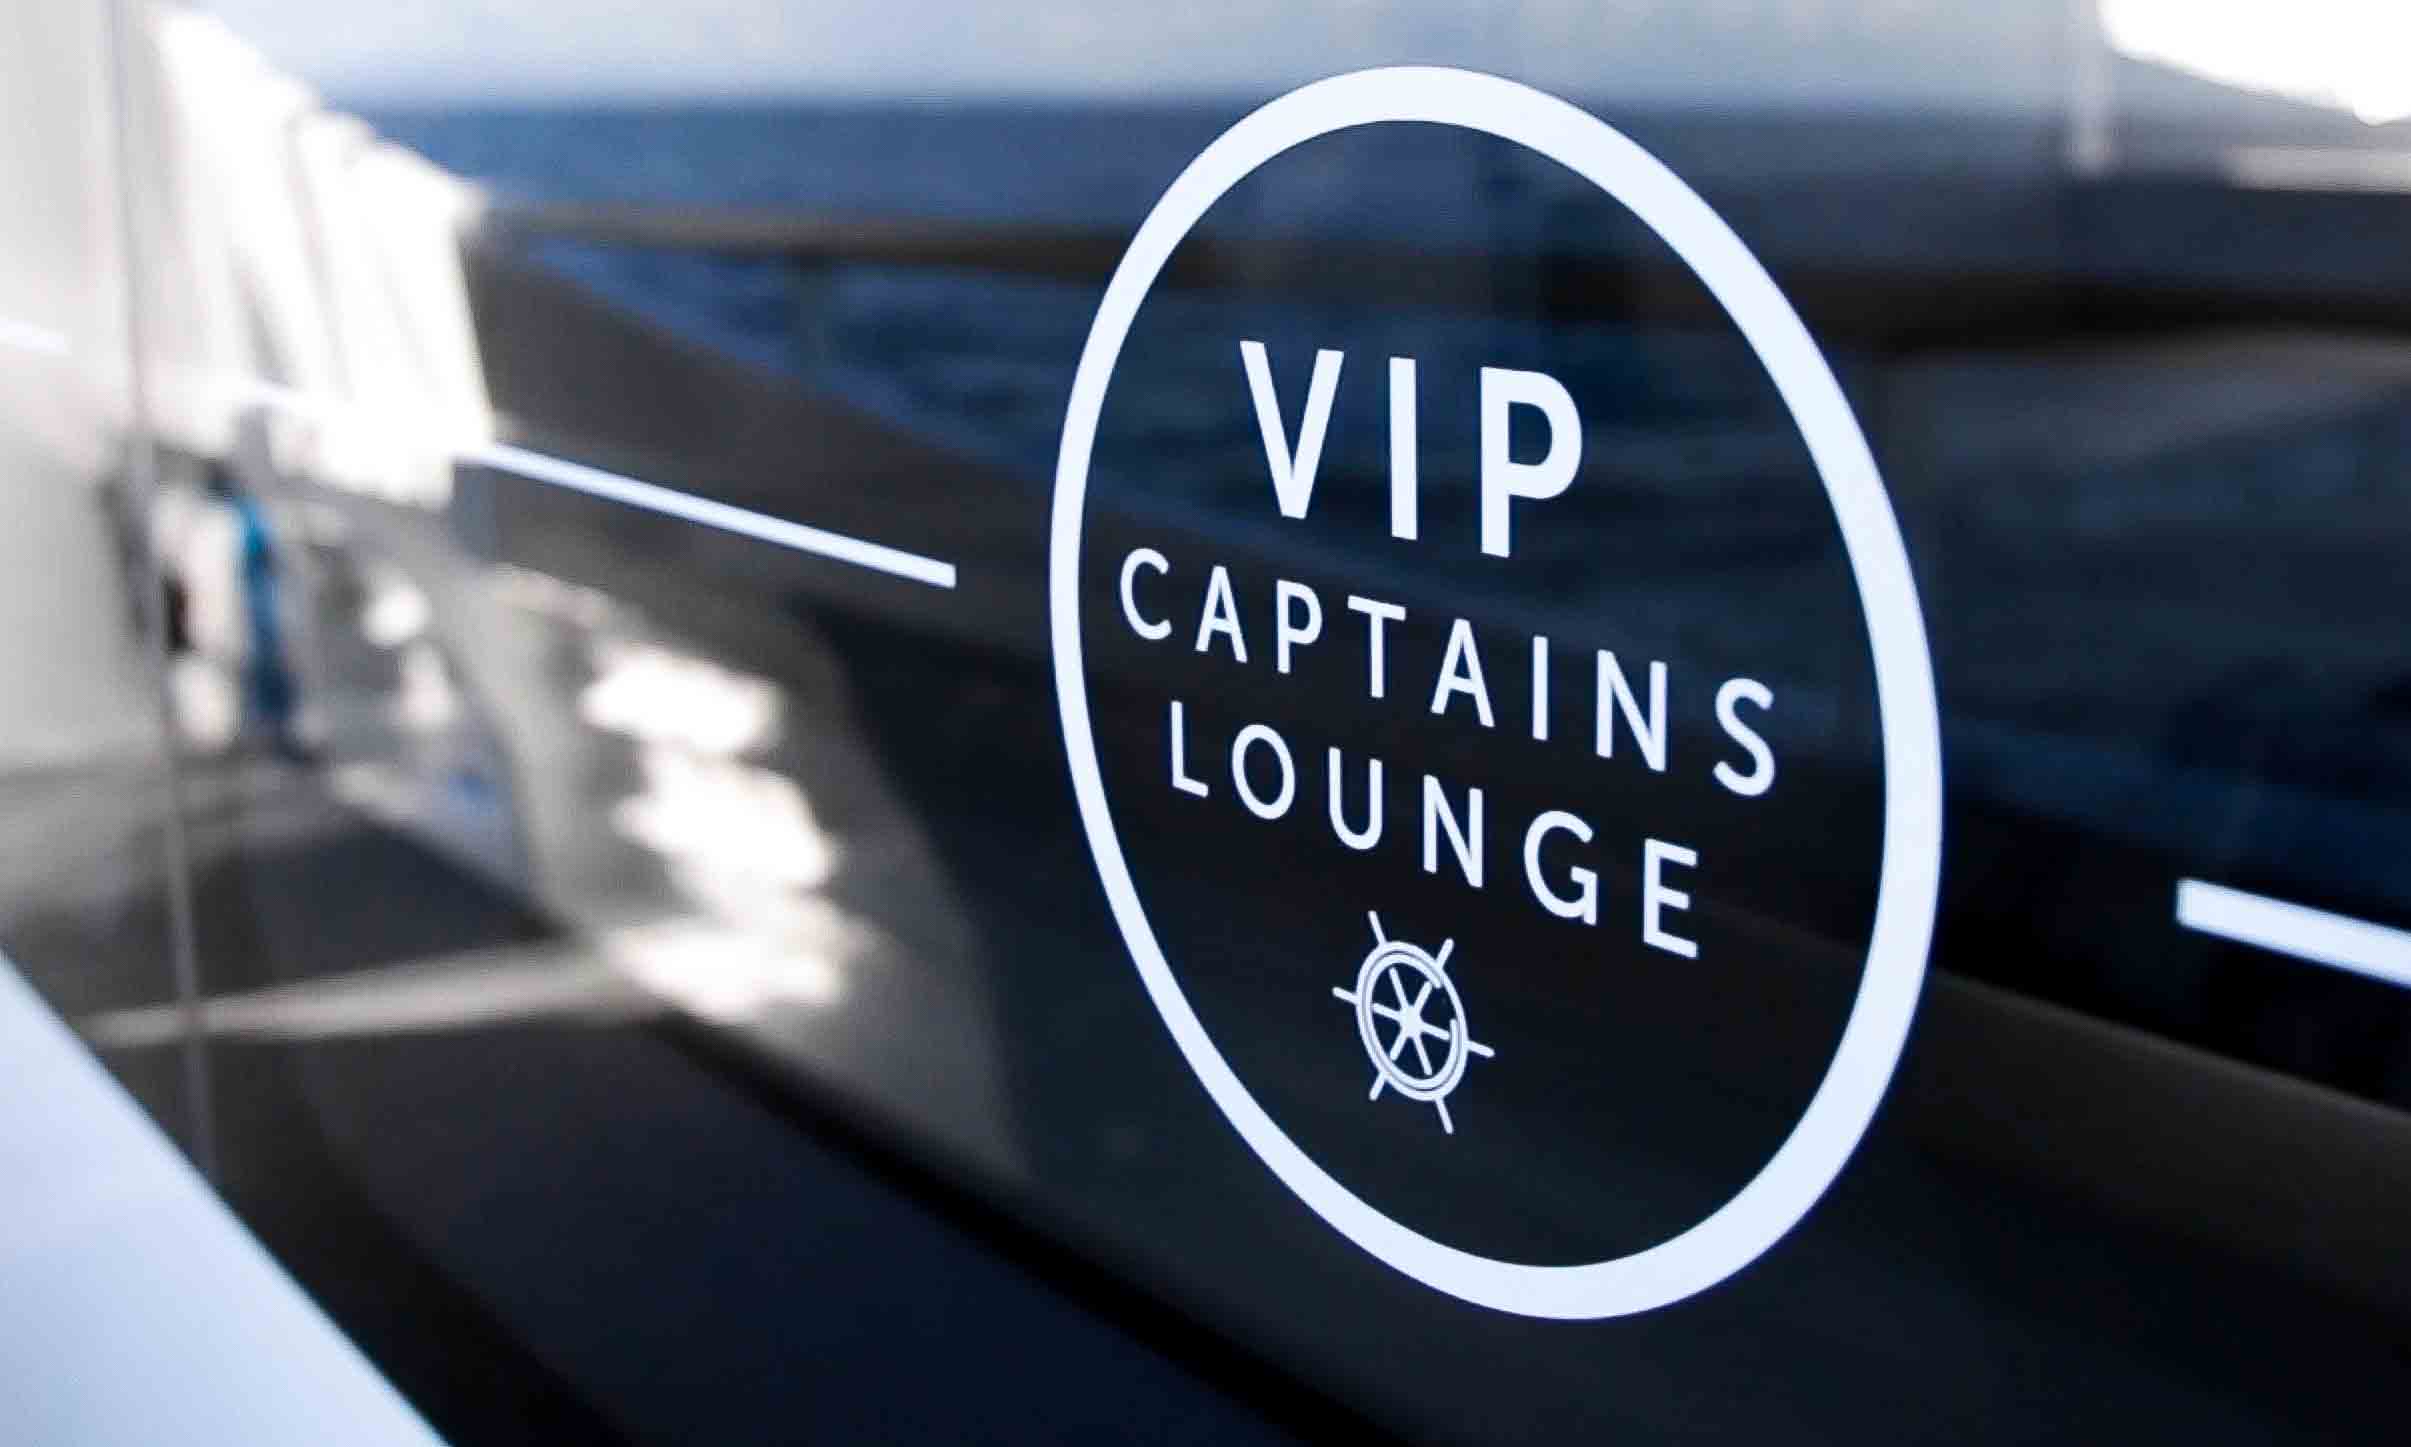 Whale Watching Cruise - Captain's Lounge Upgrade